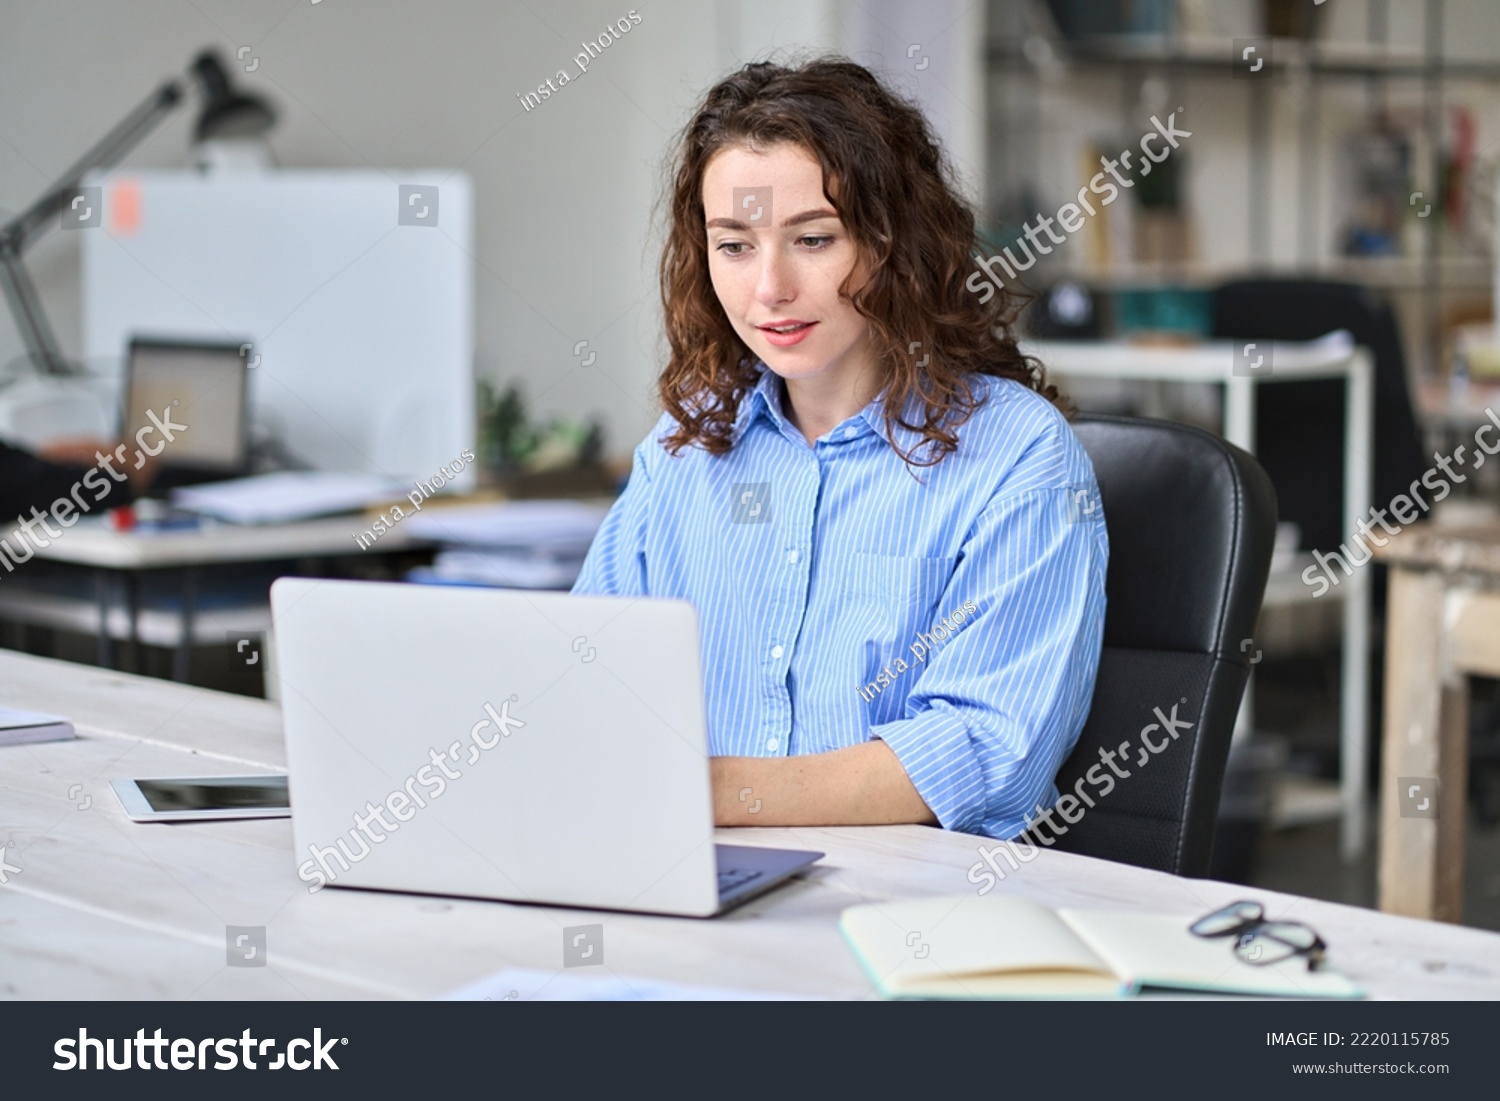 Young business woman company employee sitting at desk working on laptop. Busy female professional worker marketer using computer in corporate modern office managing data technology operations. #2220115785